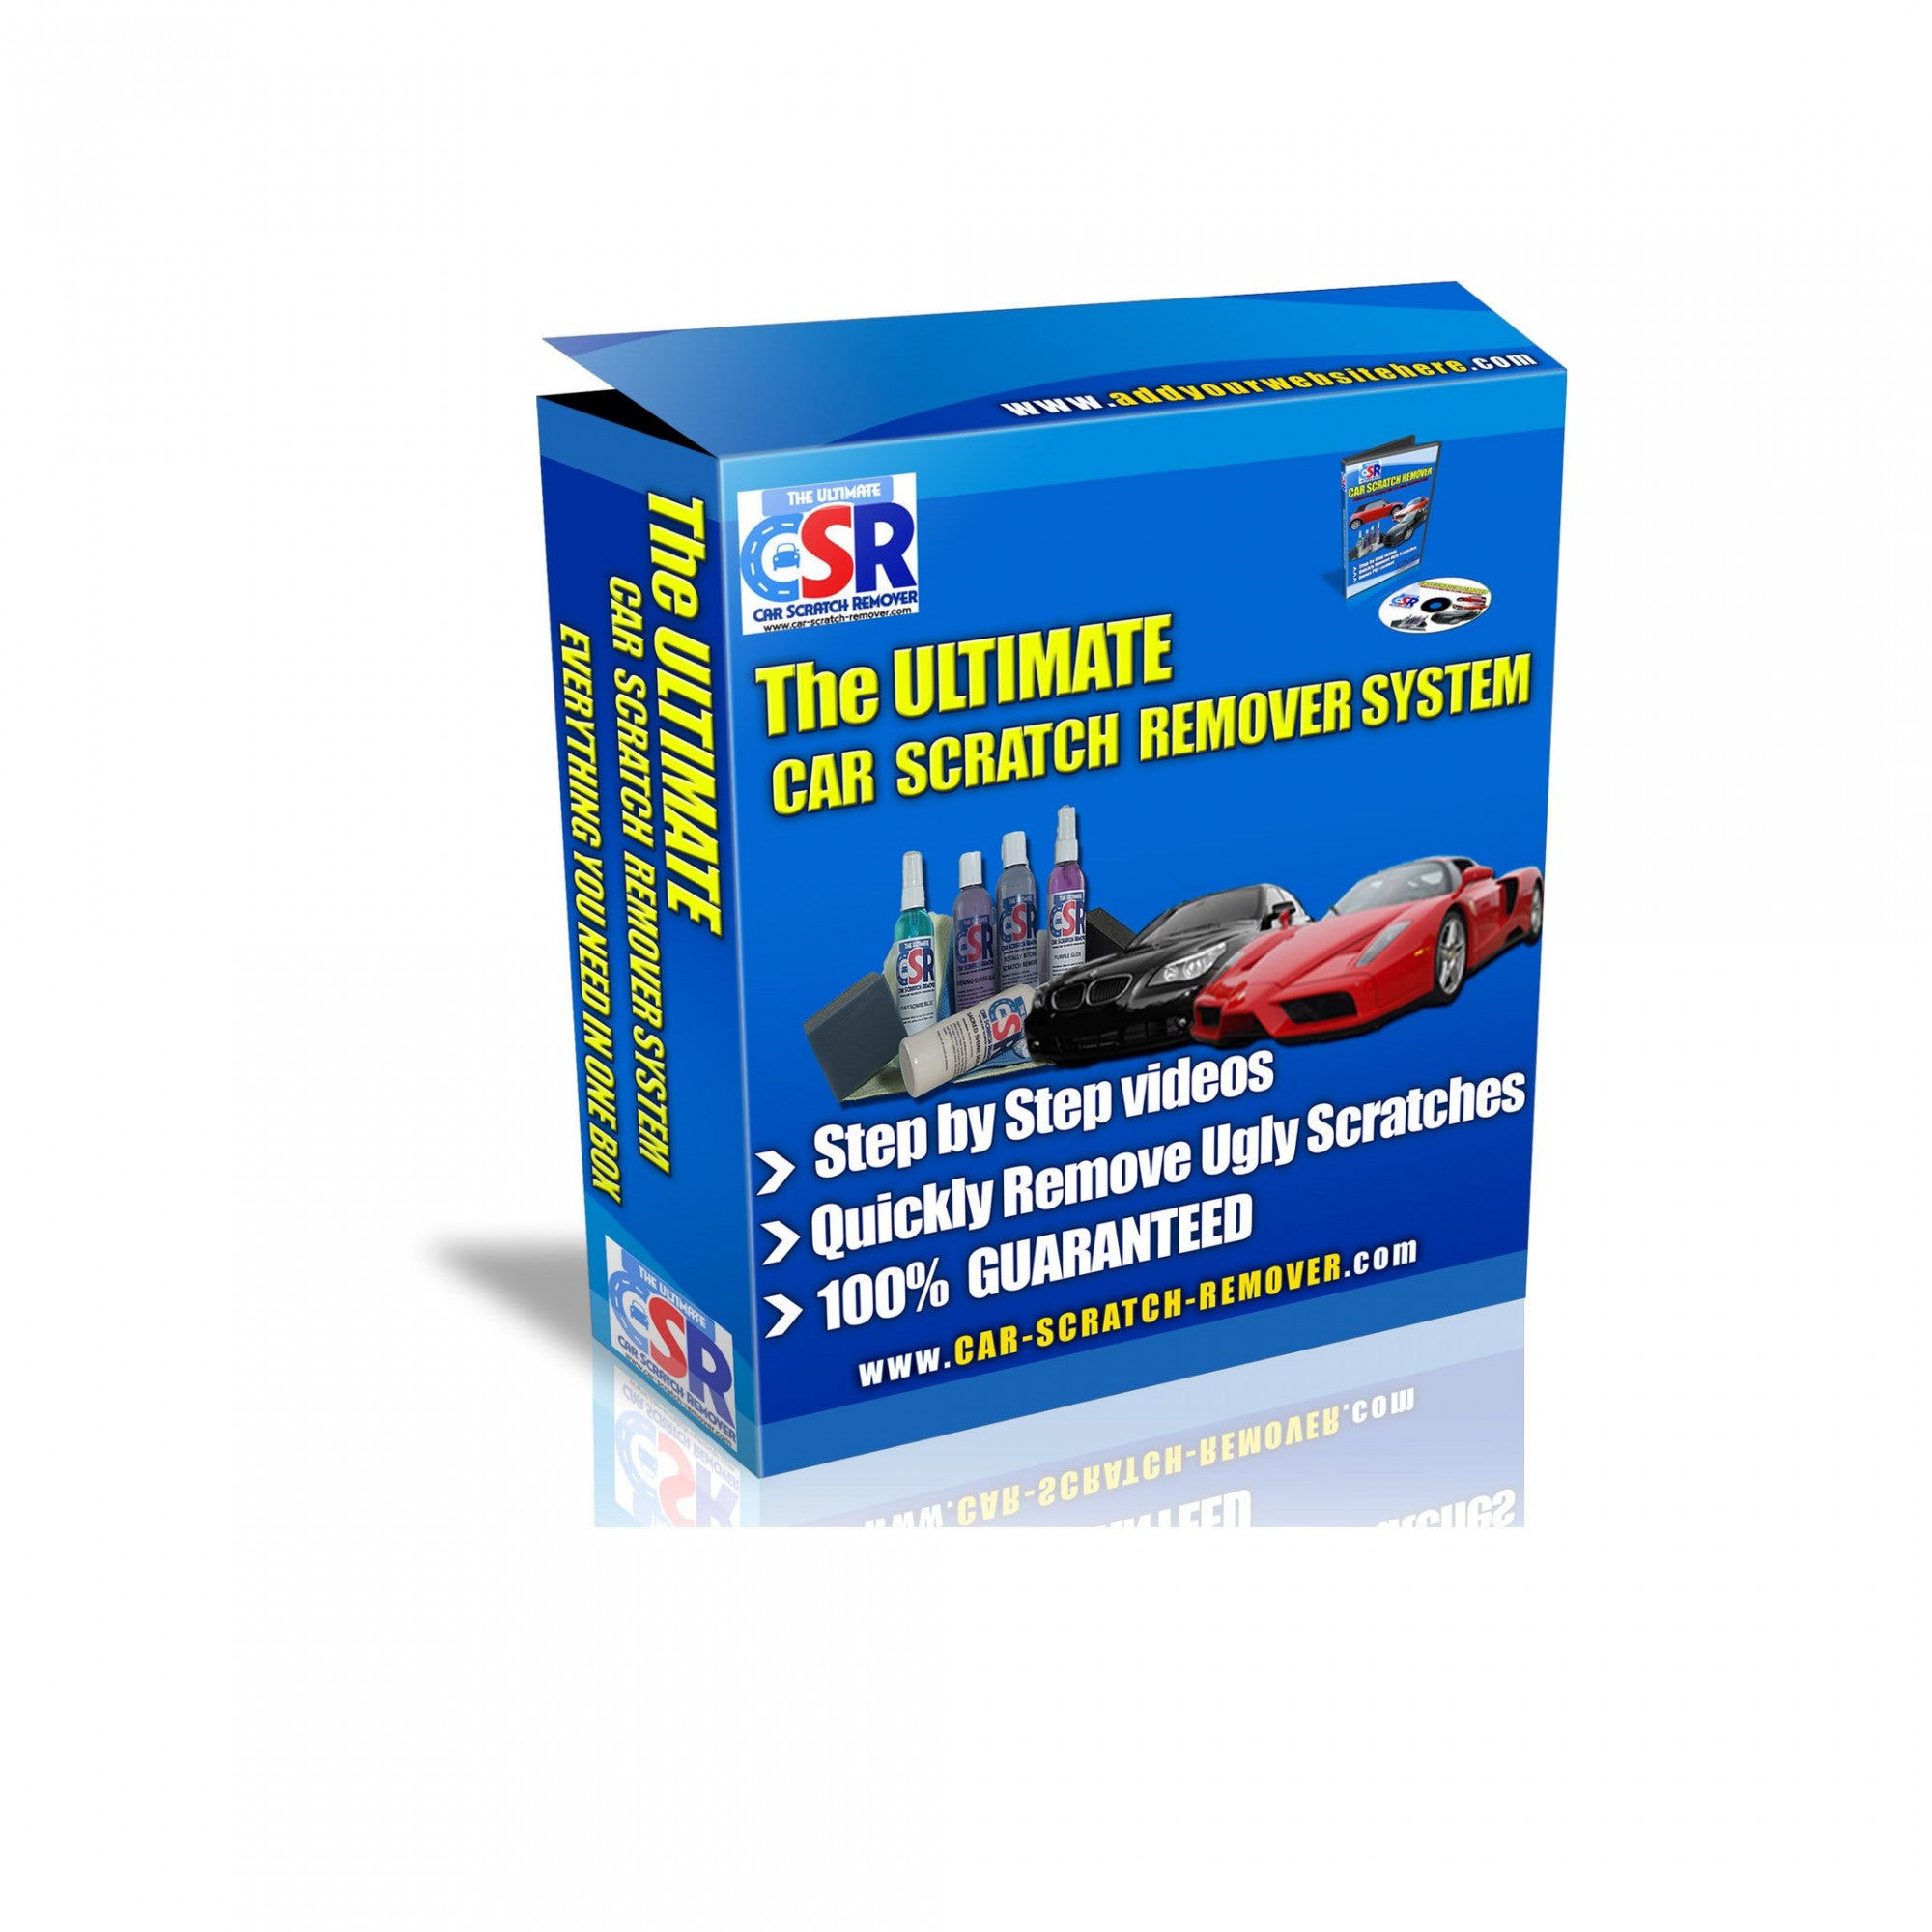 The Ultimate Car Scratch Remover Kit